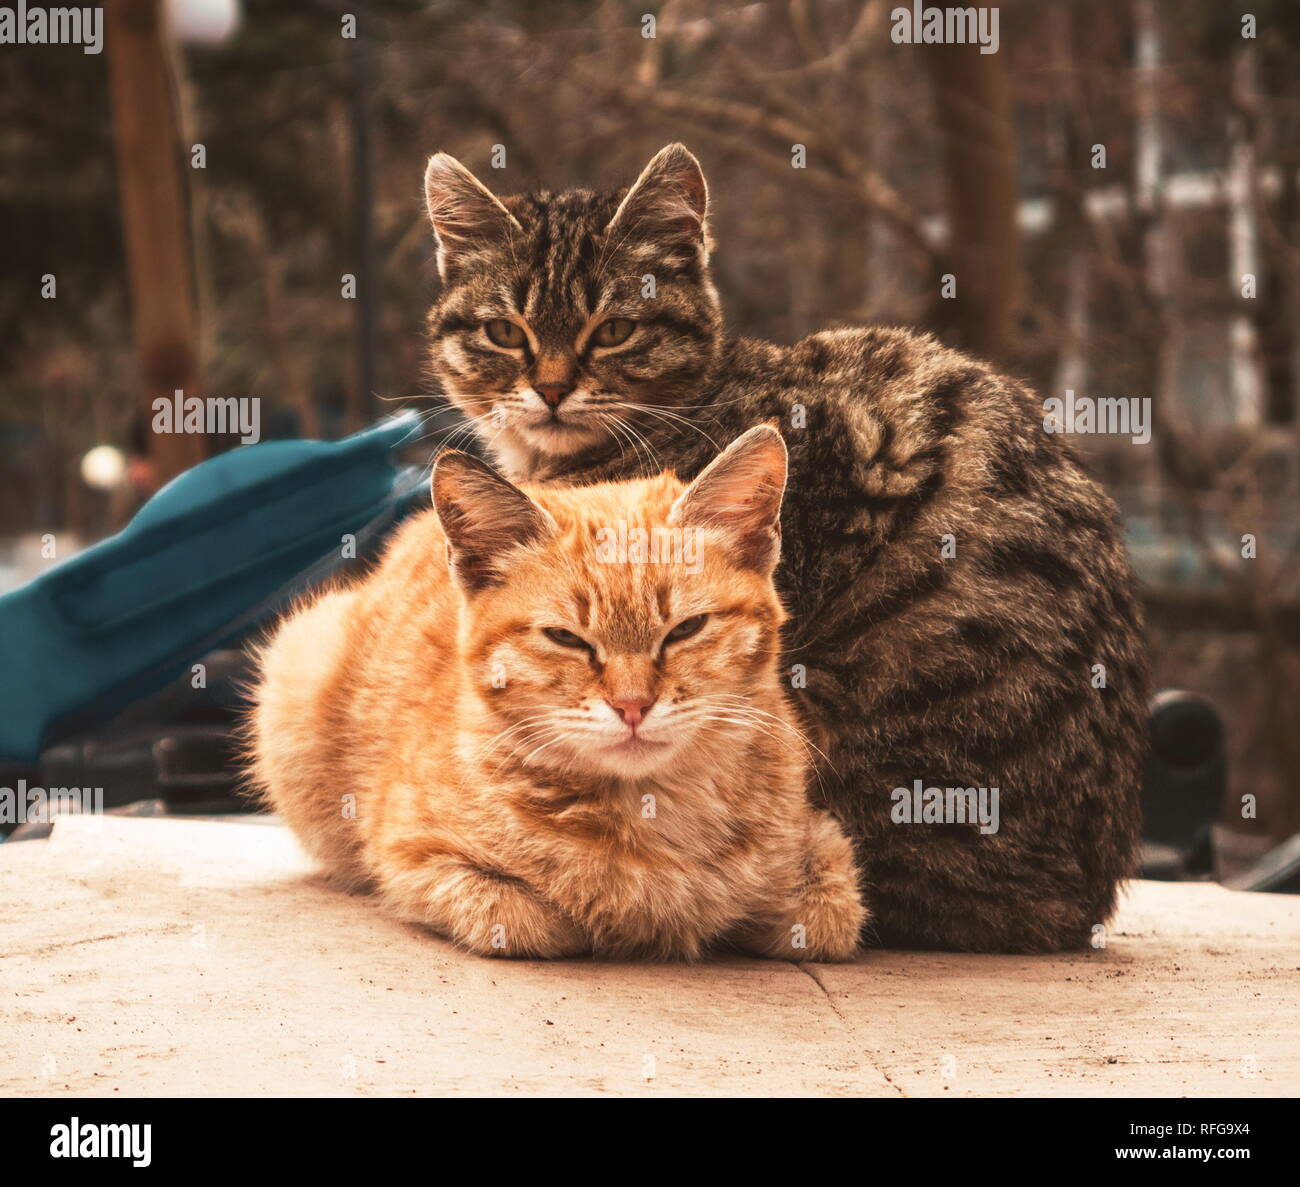 Portrat of the two cute cats Stock Photo